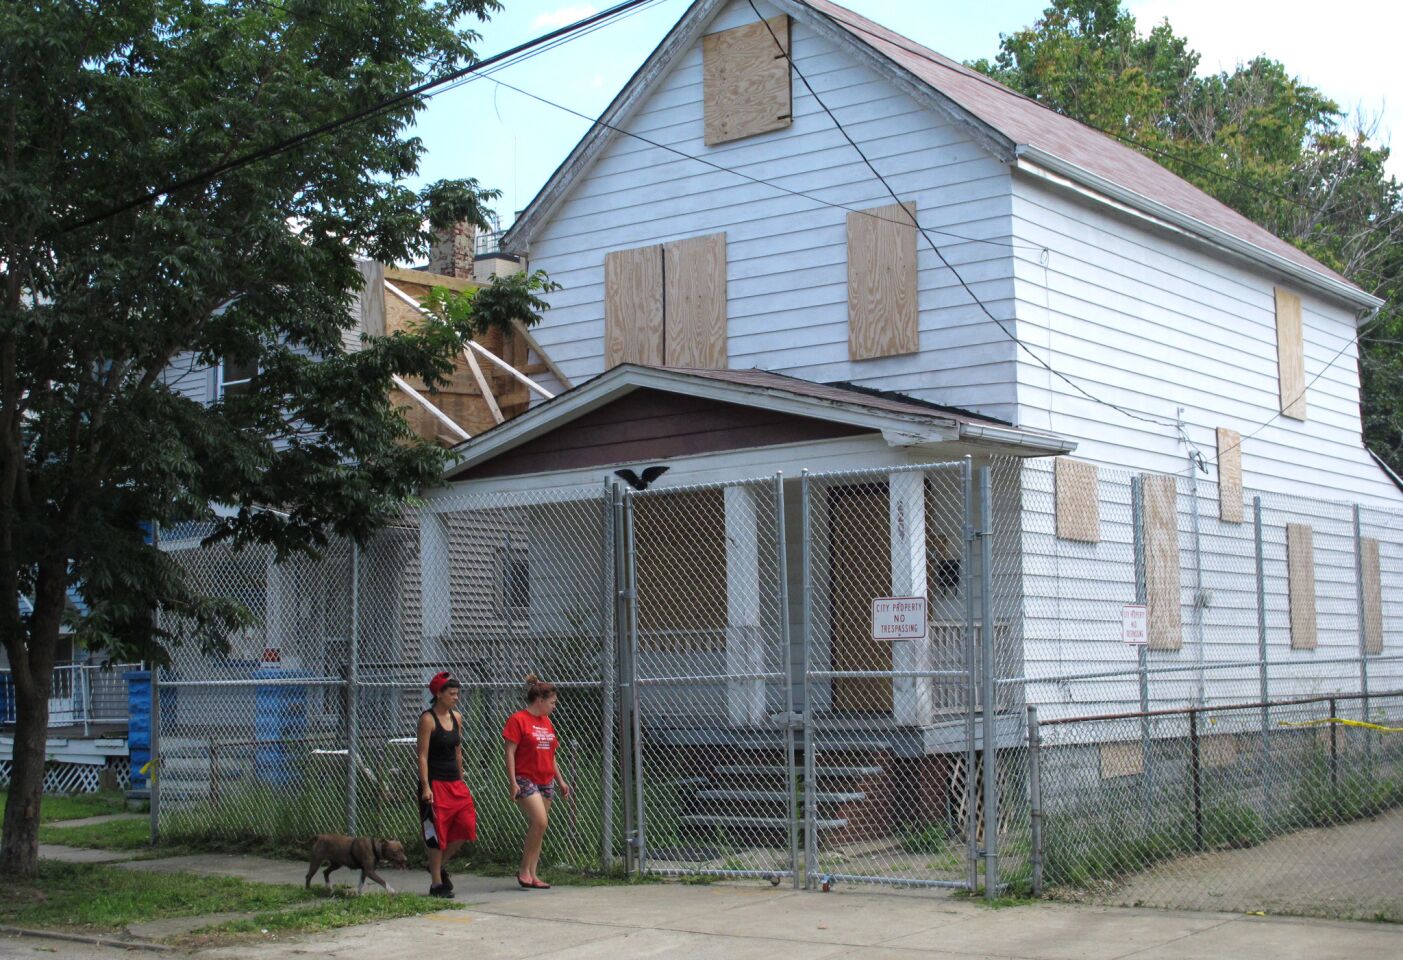 Neighbors Jessica Rodriguez and Caitlin Coyne, both 19, walk last month past the house where Ariel Castro kept three women captive for a decade. The house was torn down Wednesday.